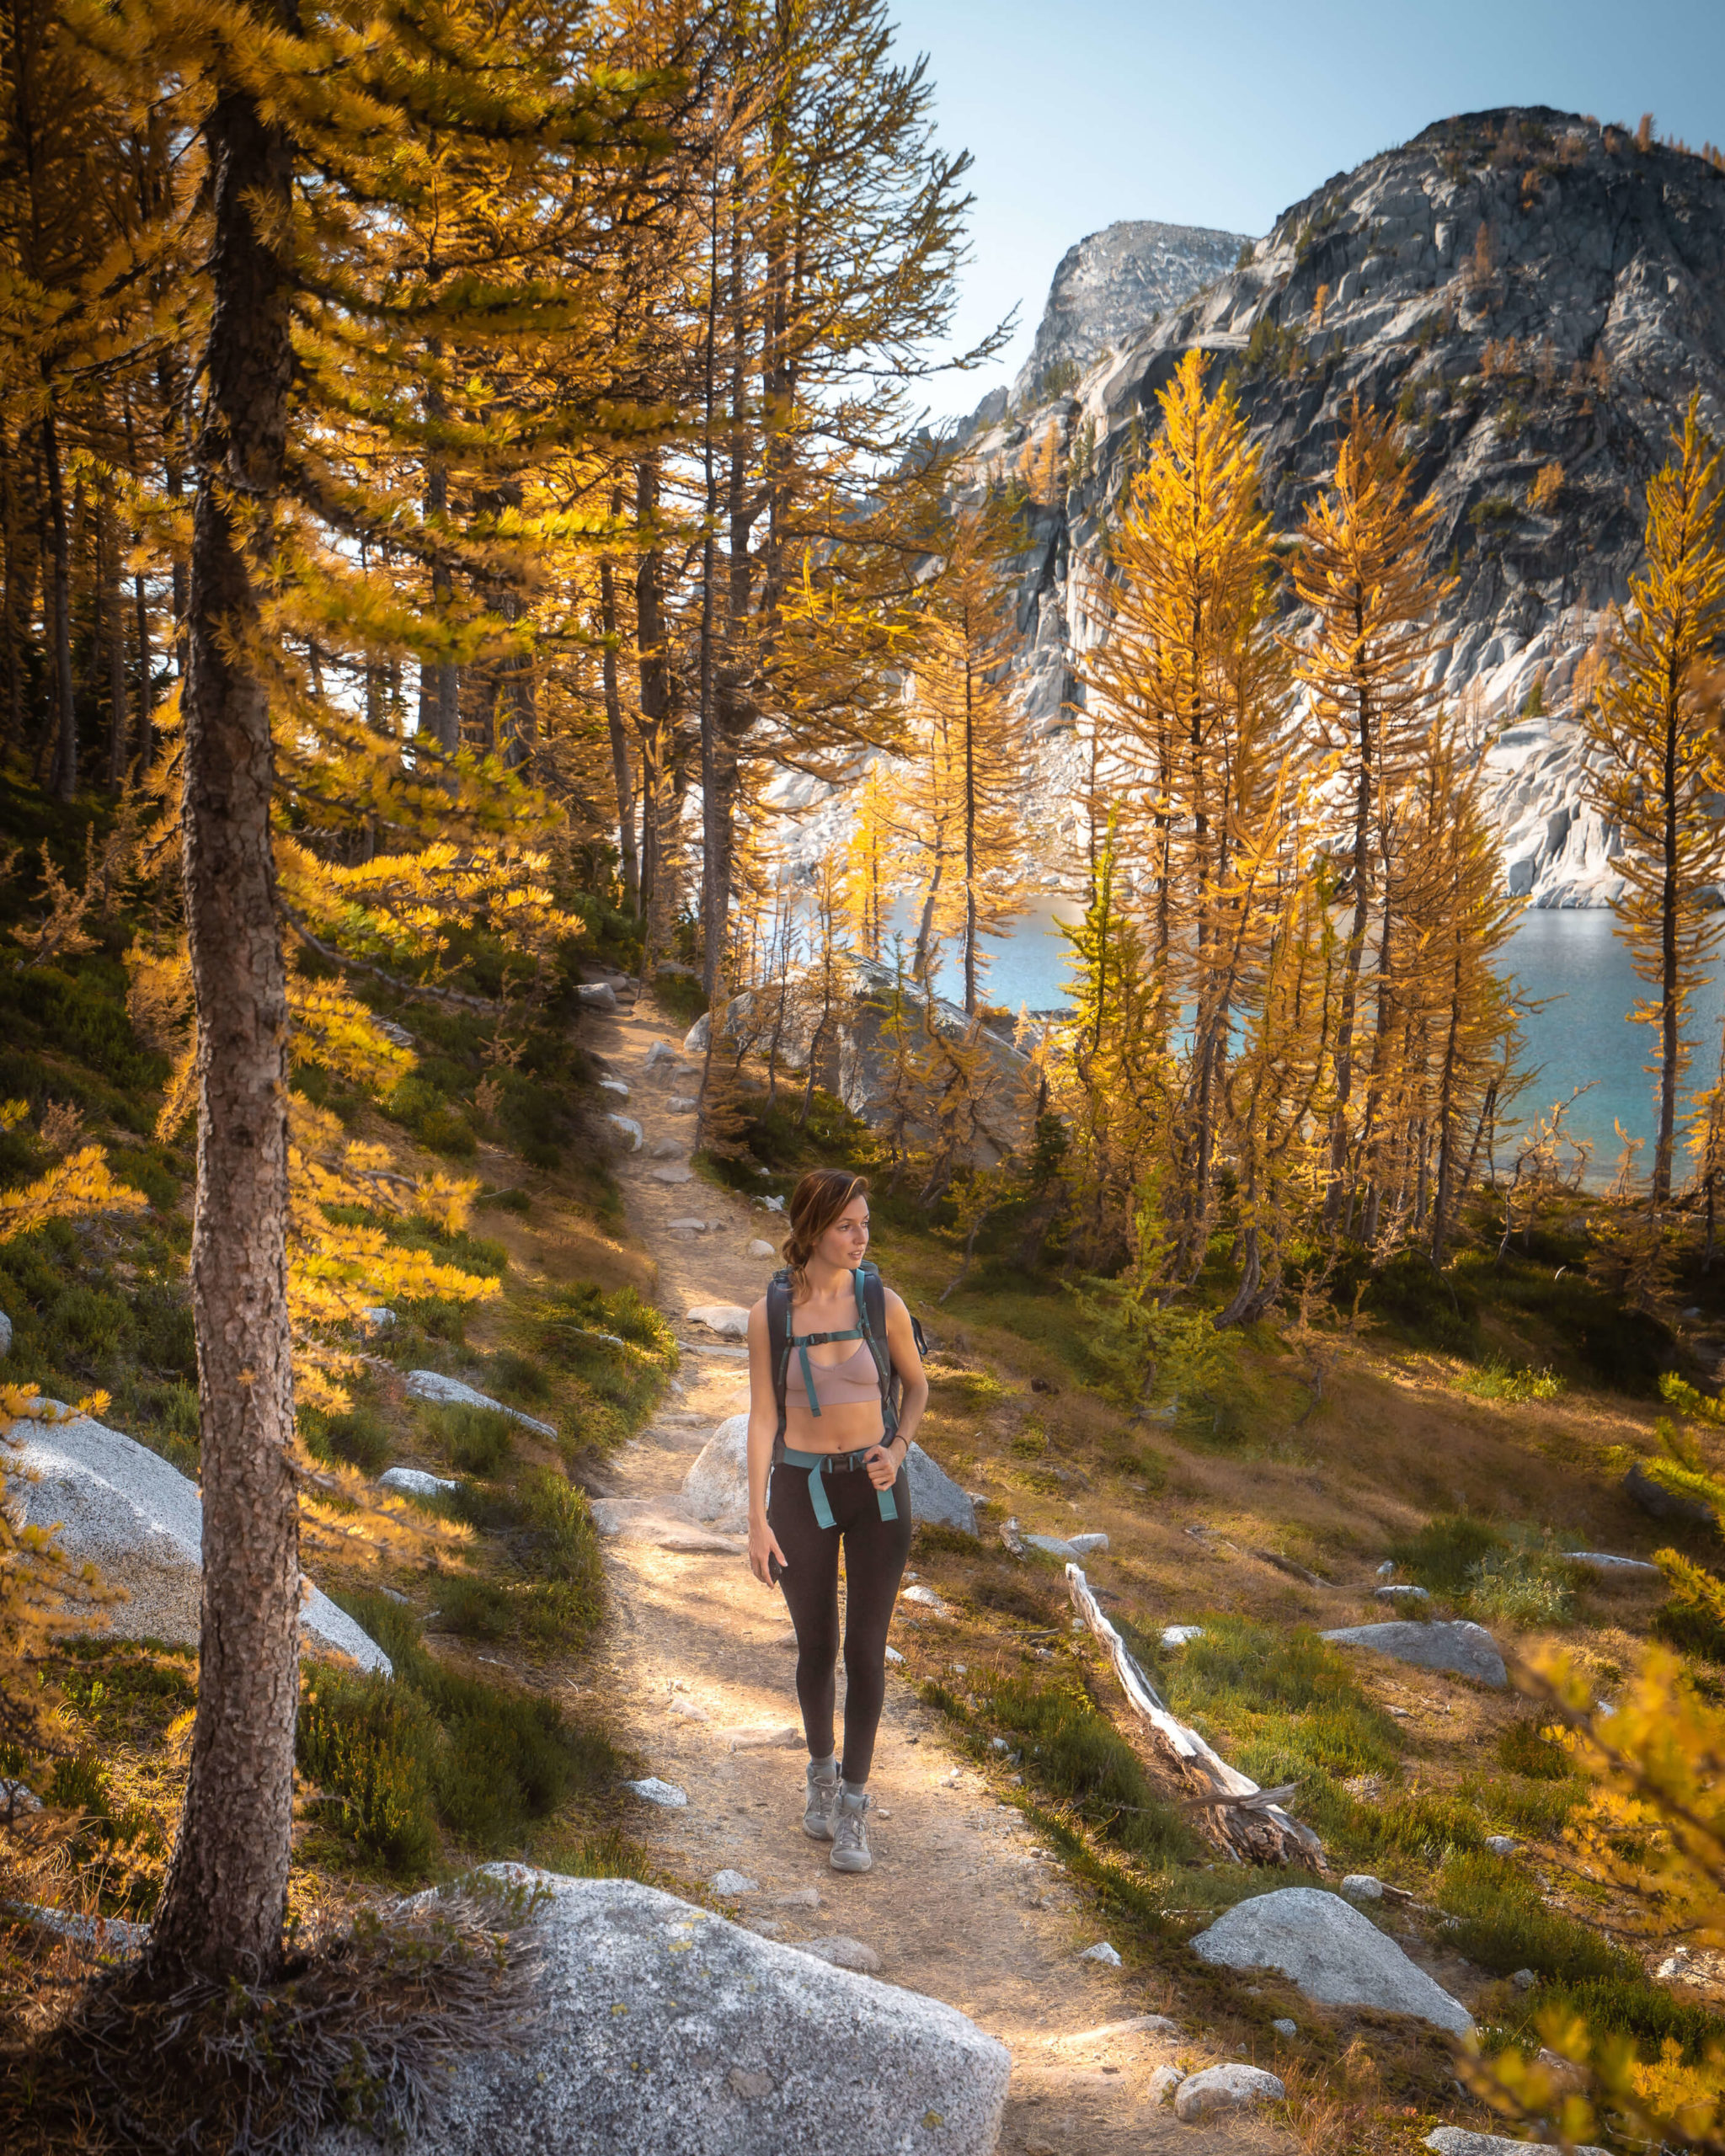 Girl hiking on trail through golden larch trees.